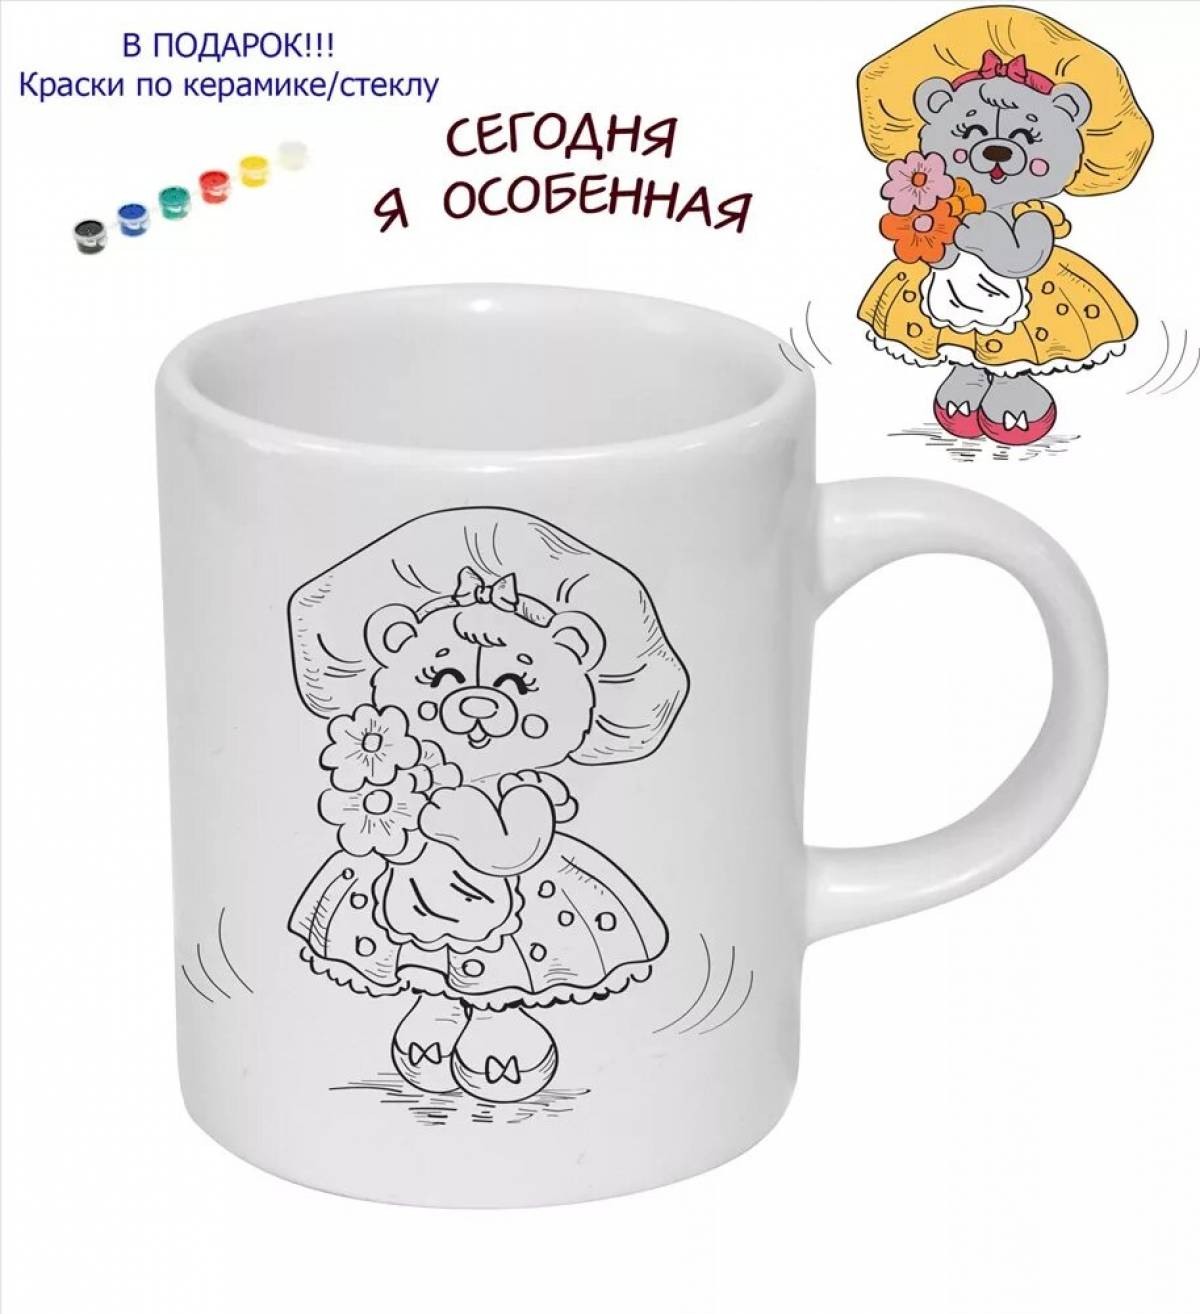 Attractive coloring mug for toddlers